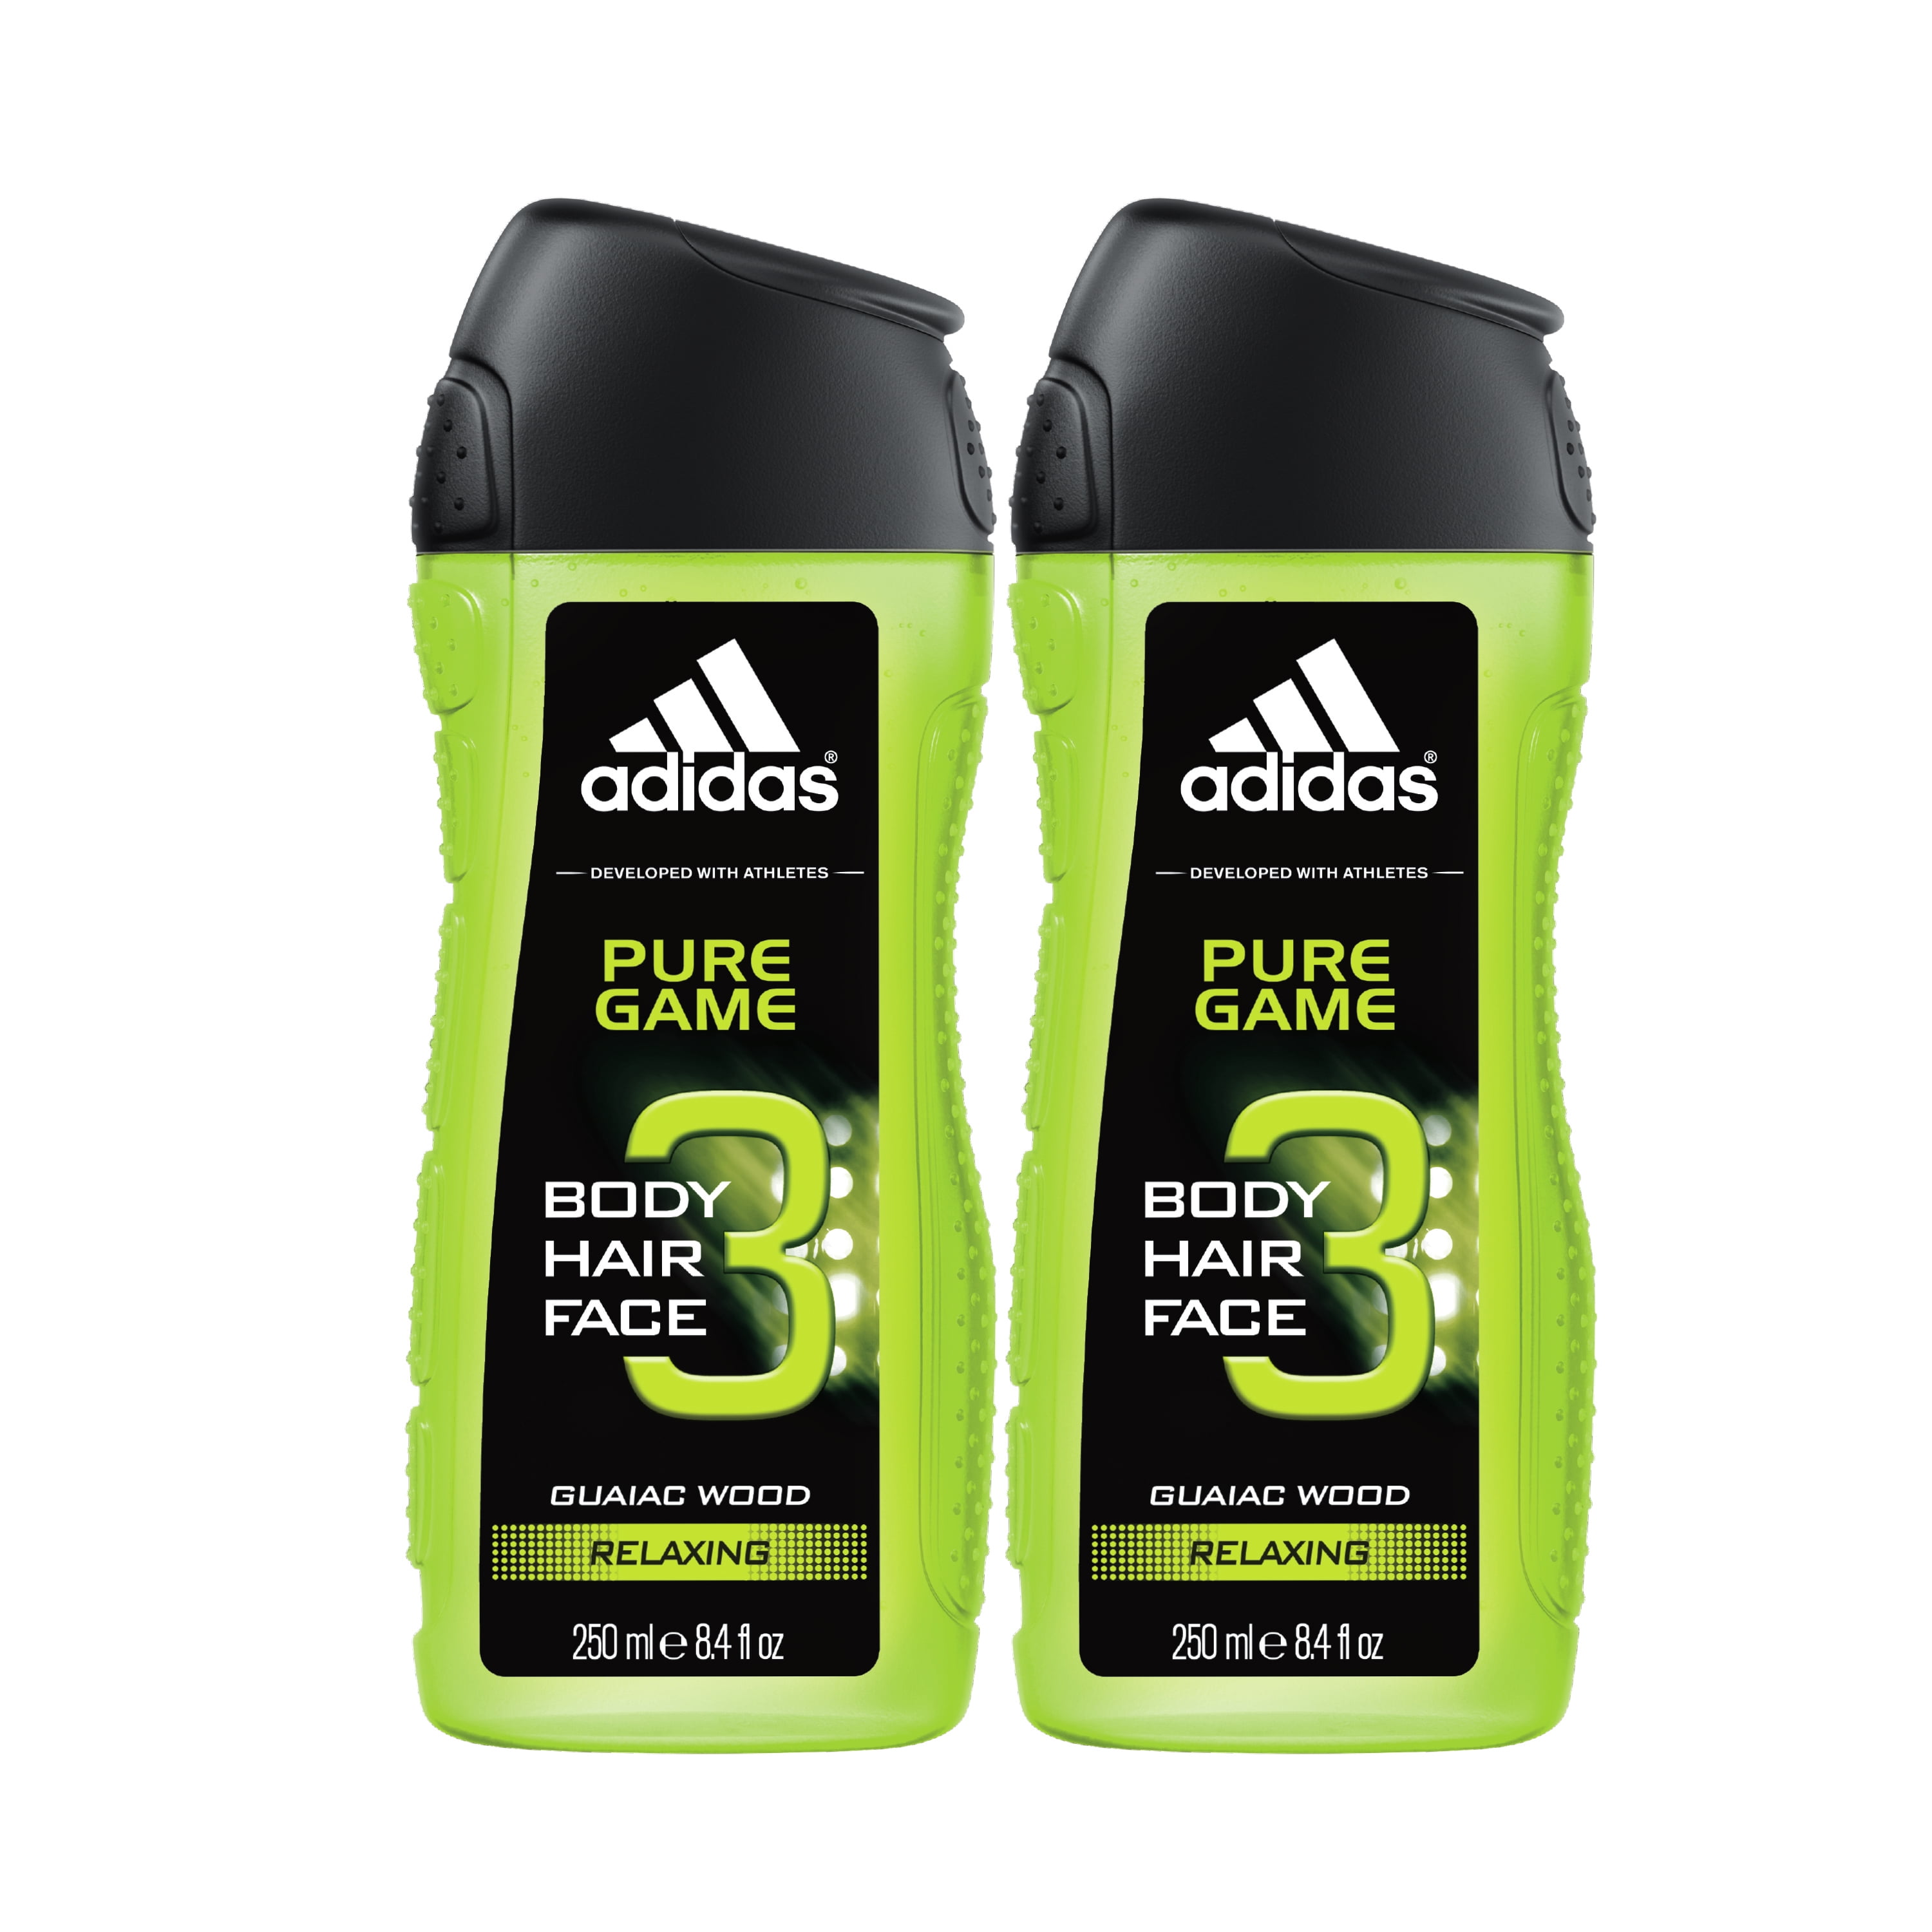 Adidas Pure Game 3-in-1 Body, Hair 